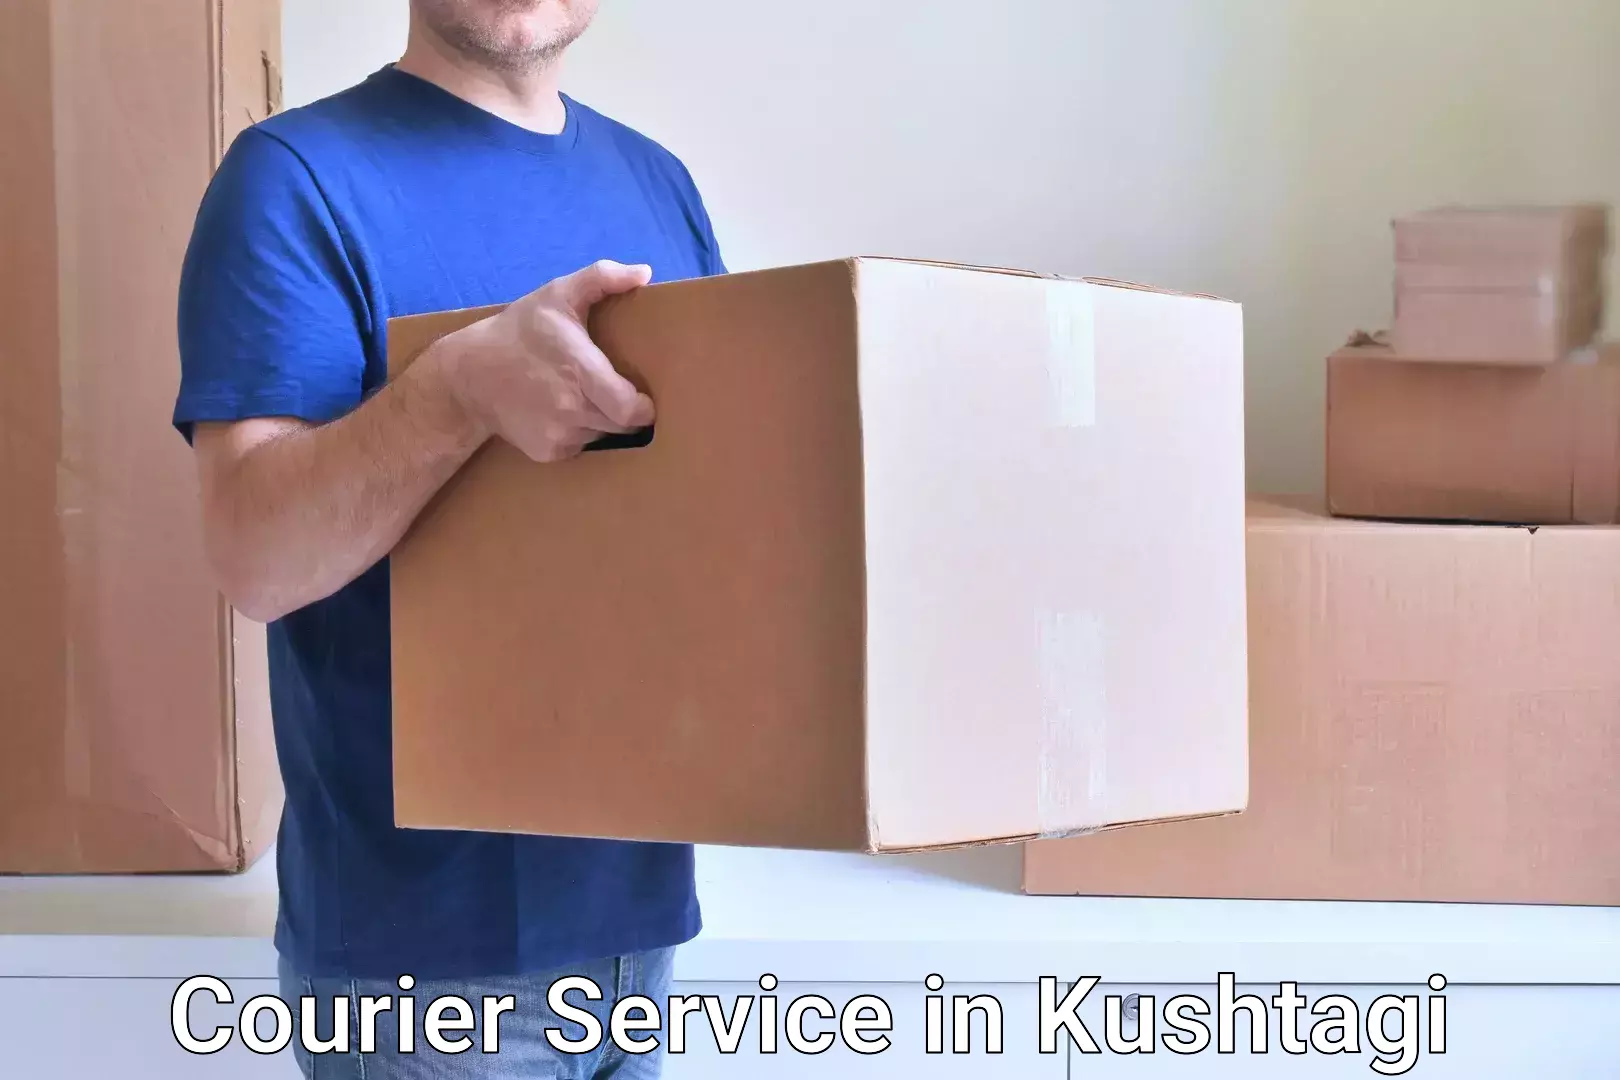 Courier service booking in Kushtagi